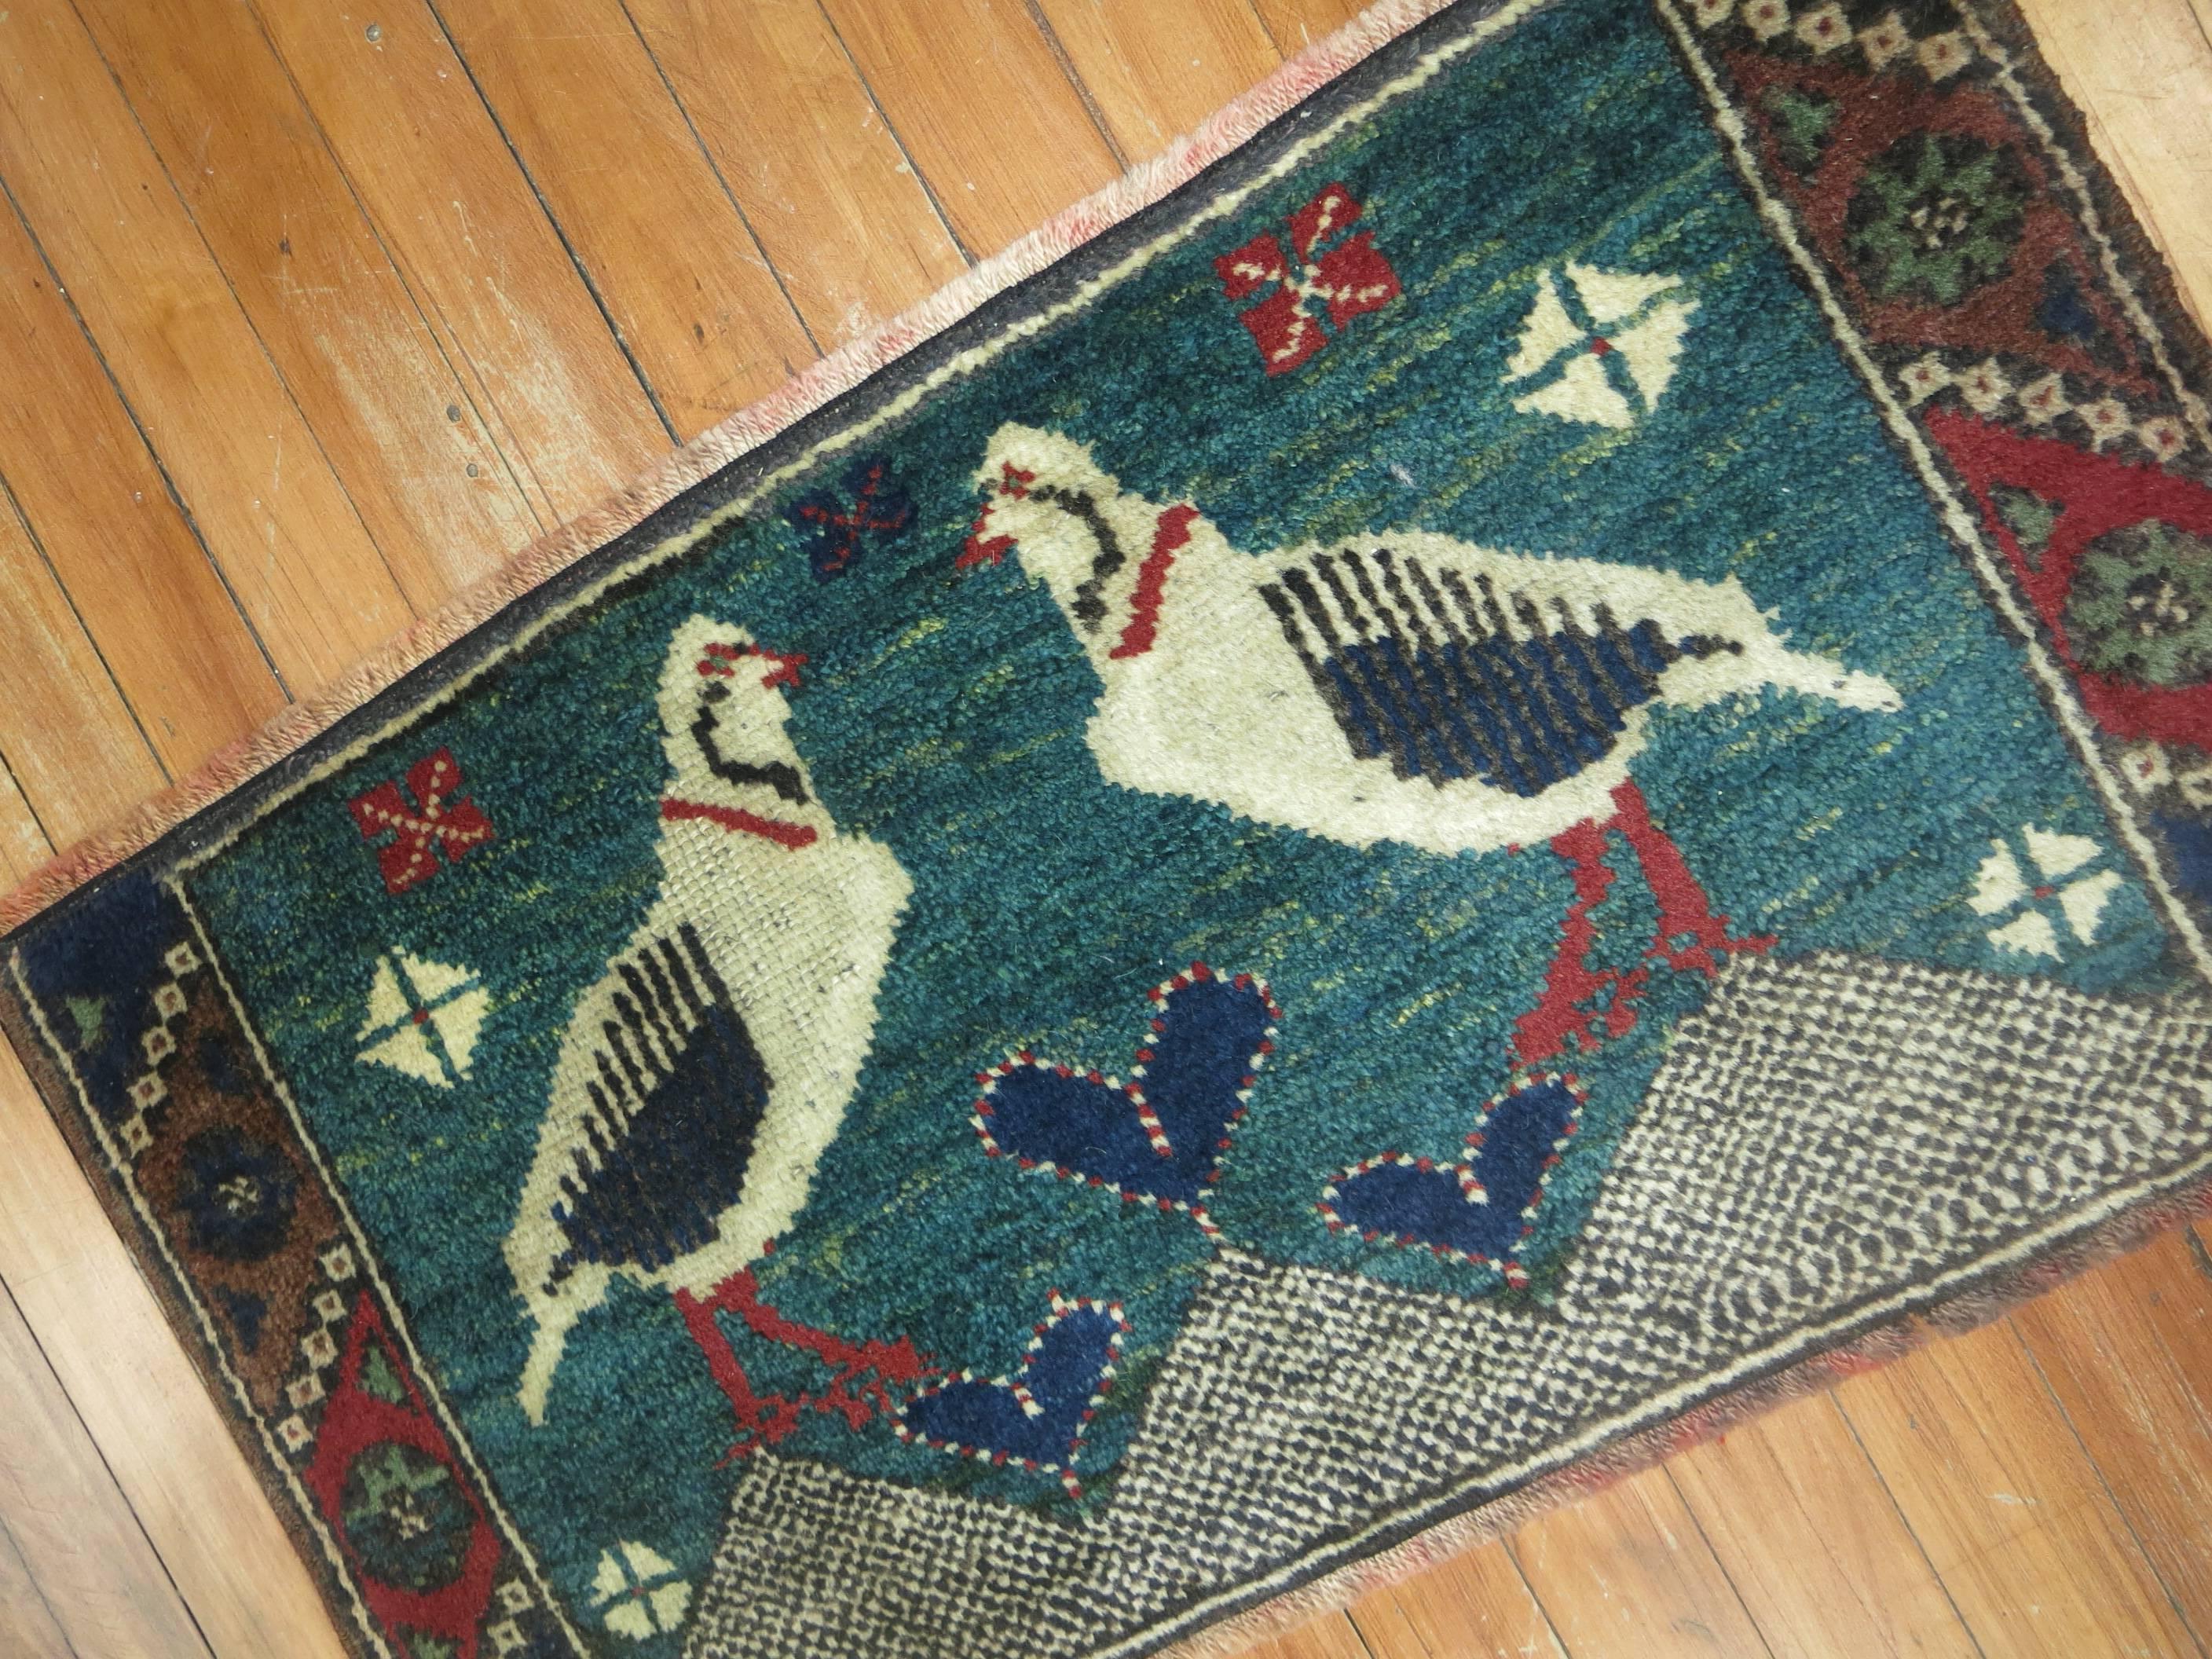 Vintage Persian pictorial throw rug with two pigeons standing and staring at each other.